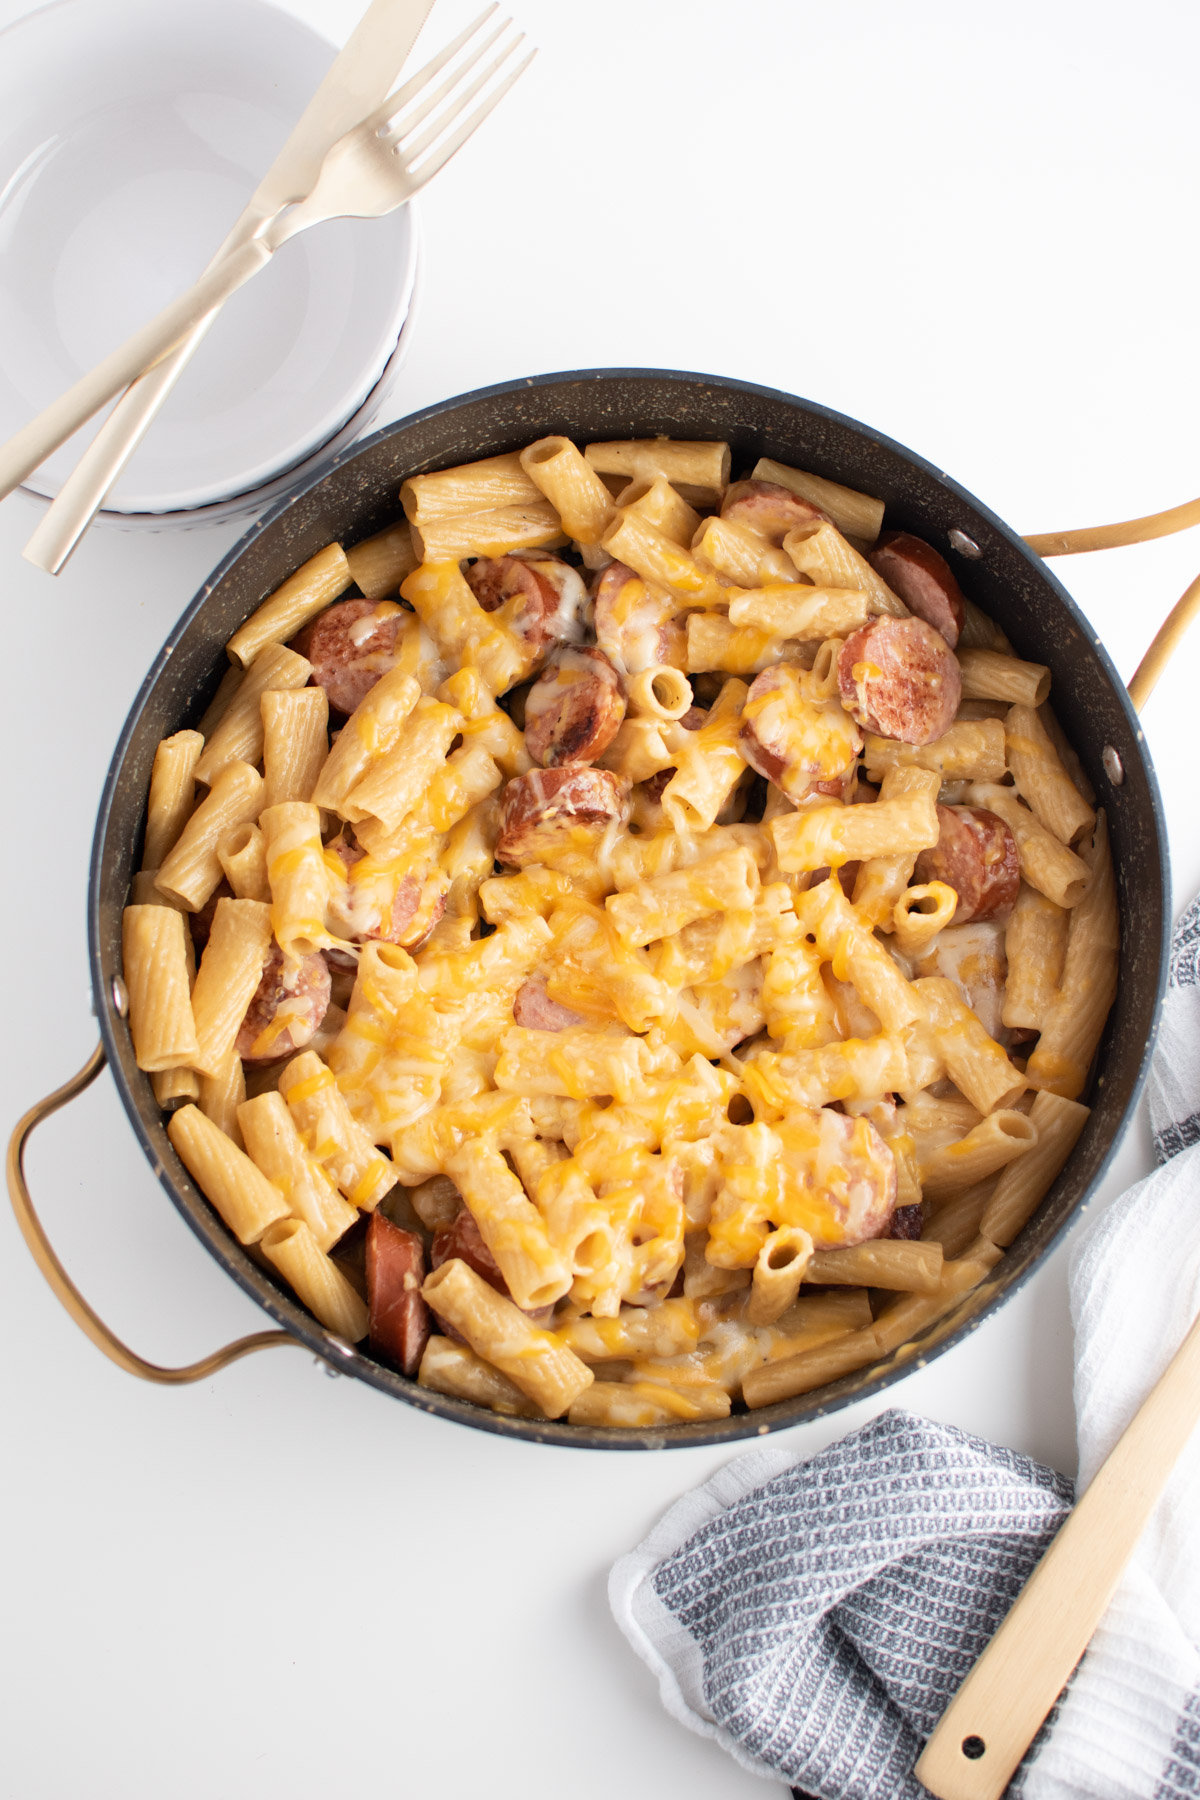 Kielbasa rigatoni pasta with melted cheese in large skillet surrounding by stack of plates and towel.